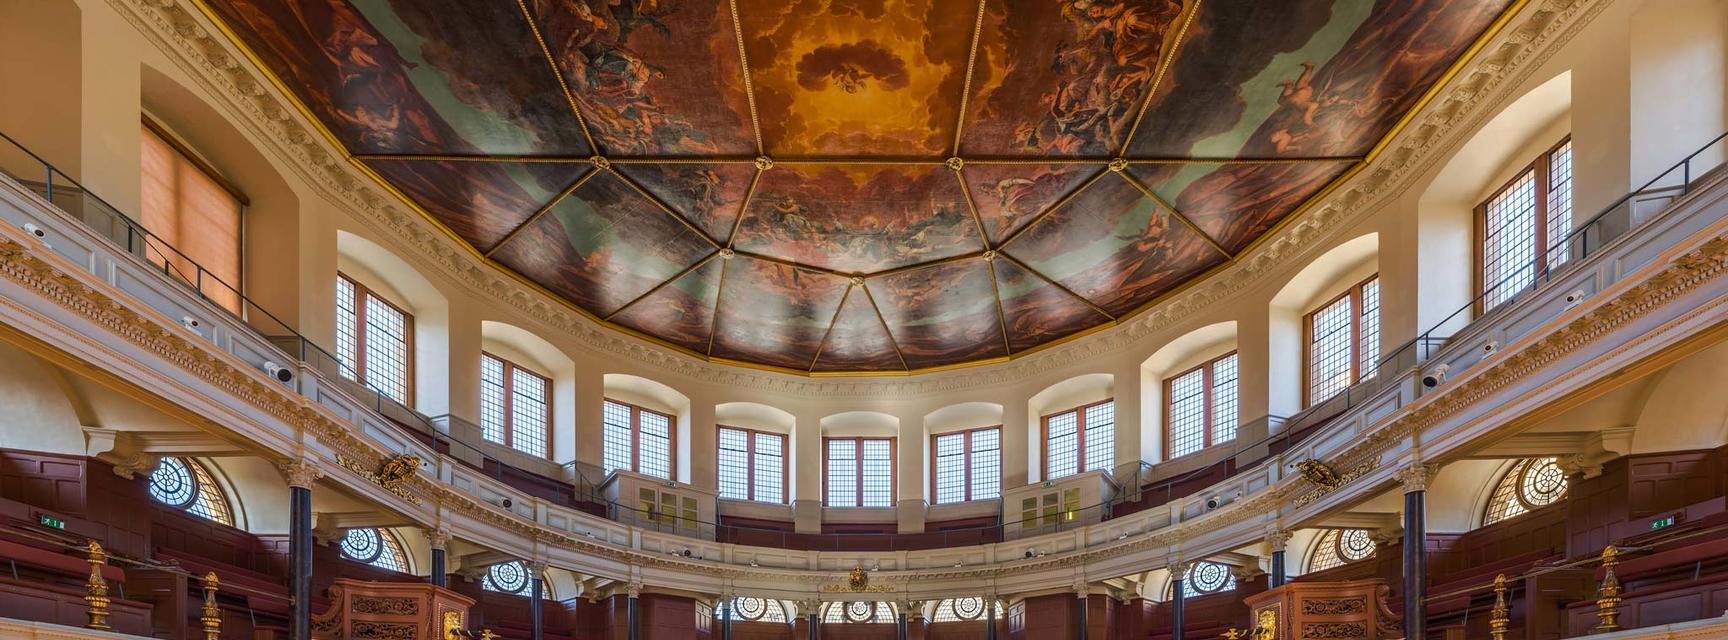 Photo of the inside of the Sheldonian Theatre with full view of the painted ceiling